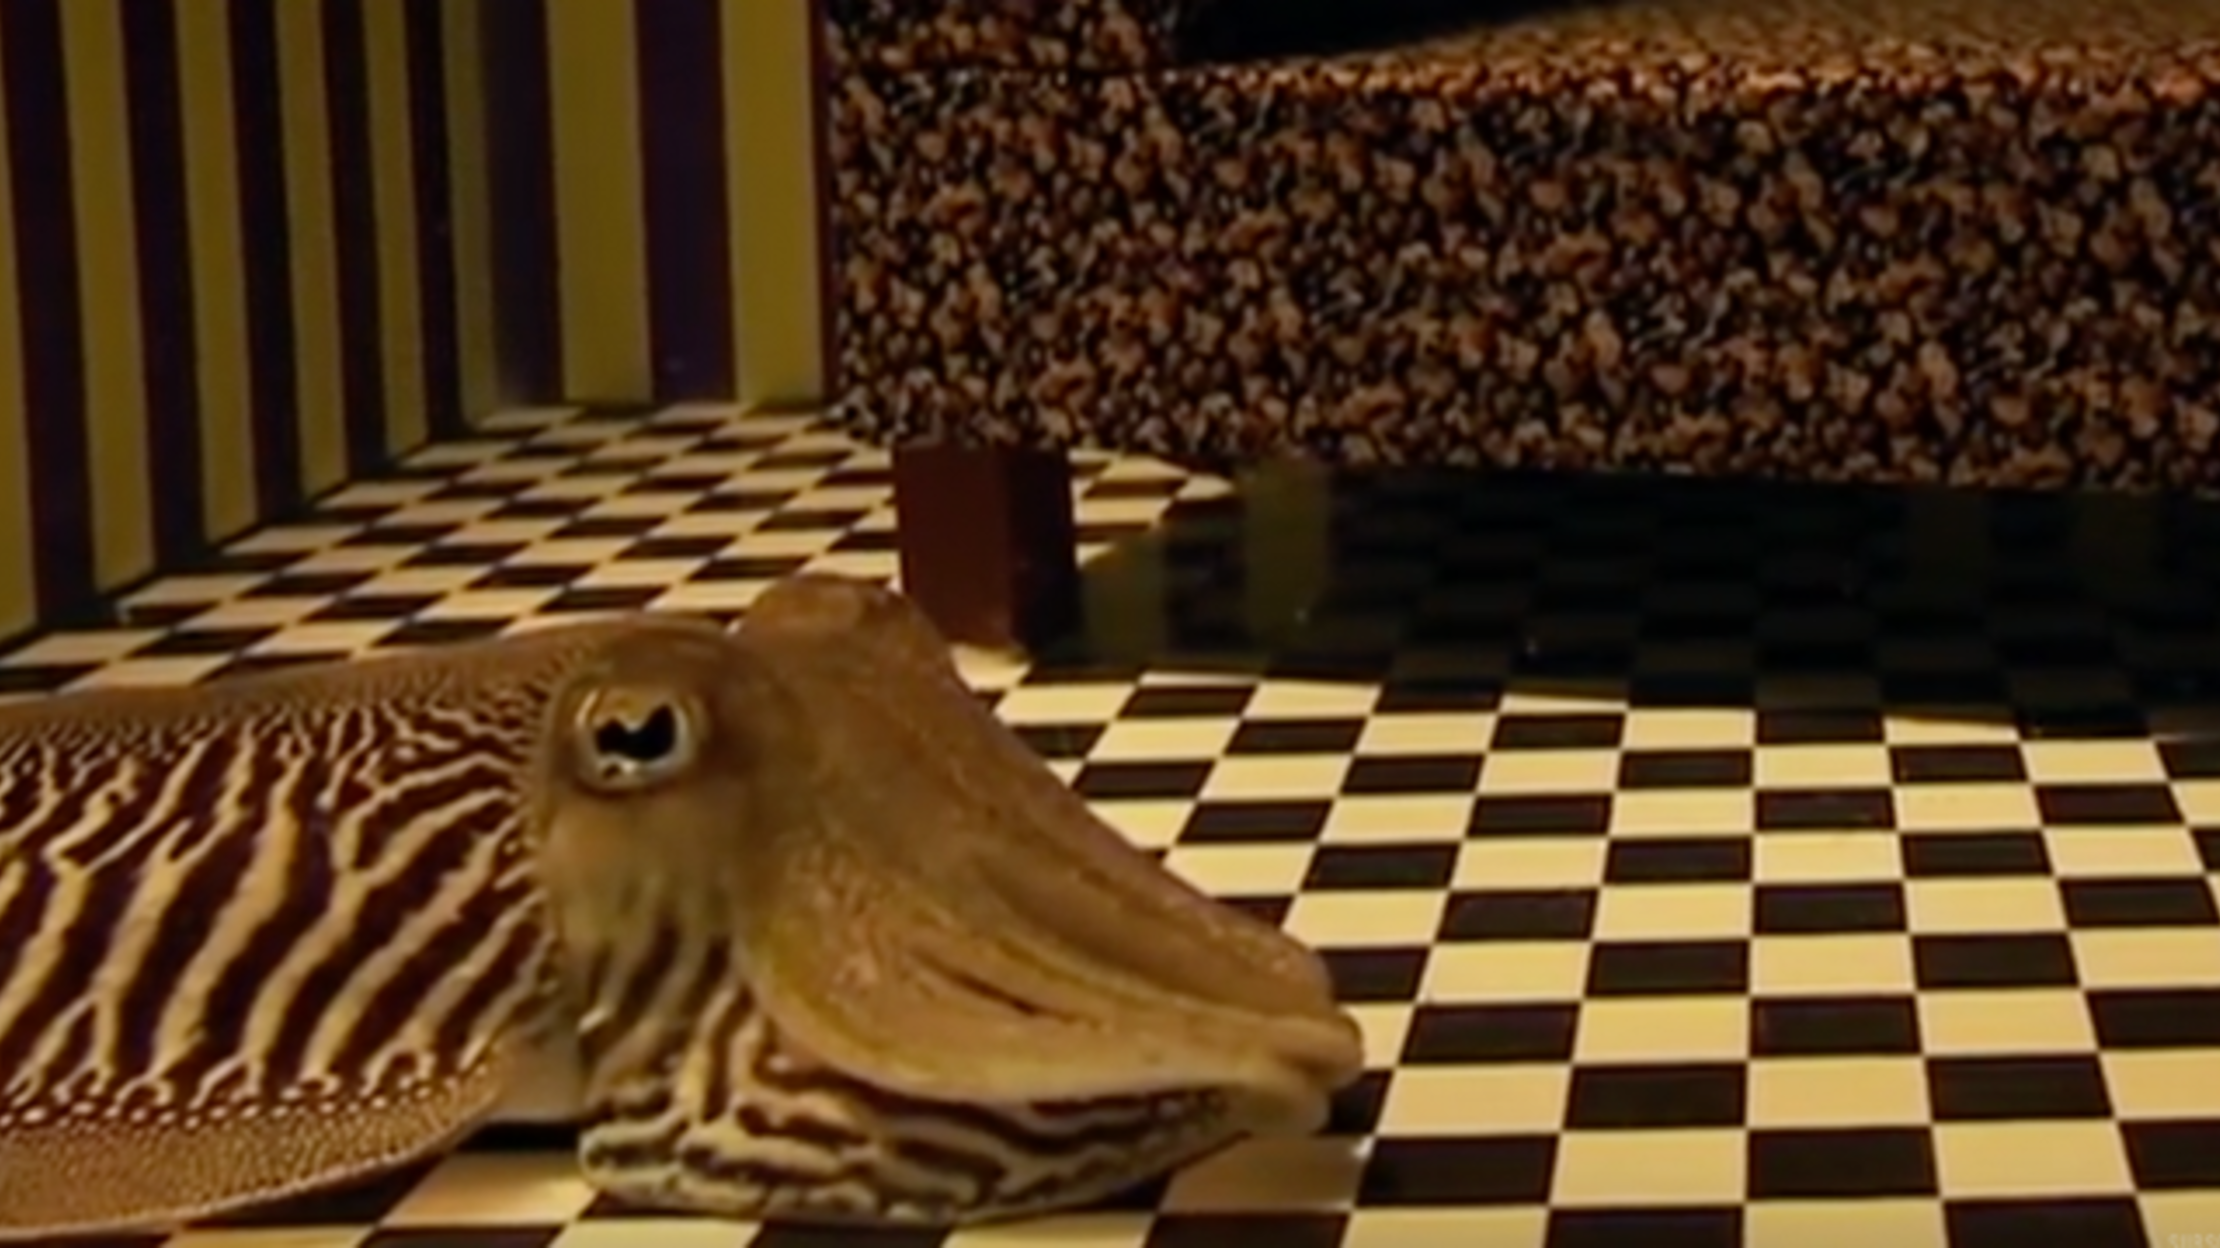 cuttlefish in living room